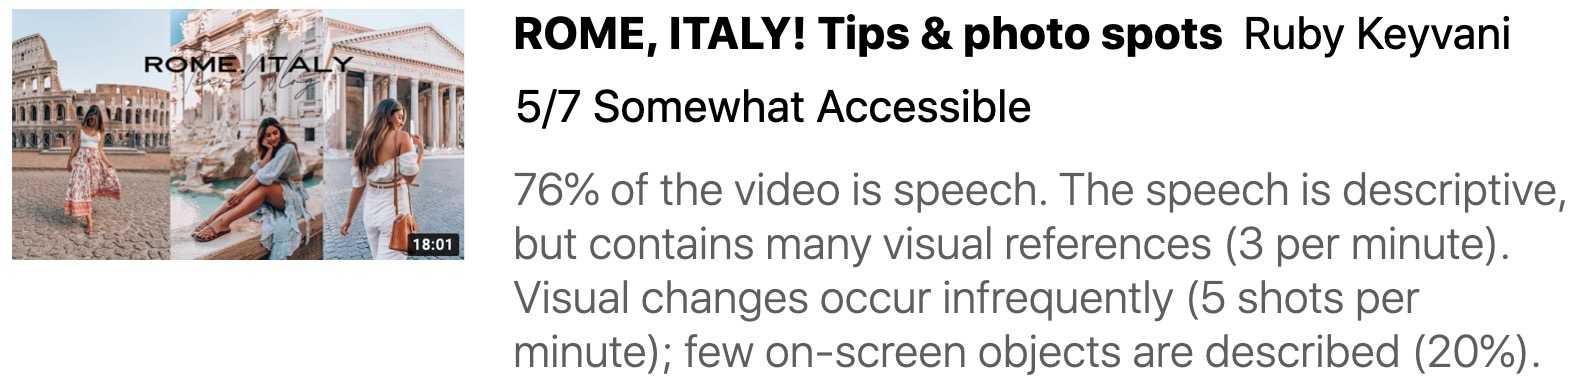 A YouTube search result augmented with accessibility information. A thumbnail of the video shows a woman in Rome. The rest of the video information reads as follows: Rome, Italy! Tips & Photo Spots by Ruby Keyvani. 5/7 Somewhat Accessible. 76% of the video is speech. The speech is descriptive but contains many visual references (3 per minute). Visual changes occur infrequently (5 shots per minute); few on-screen objects are described (20%).